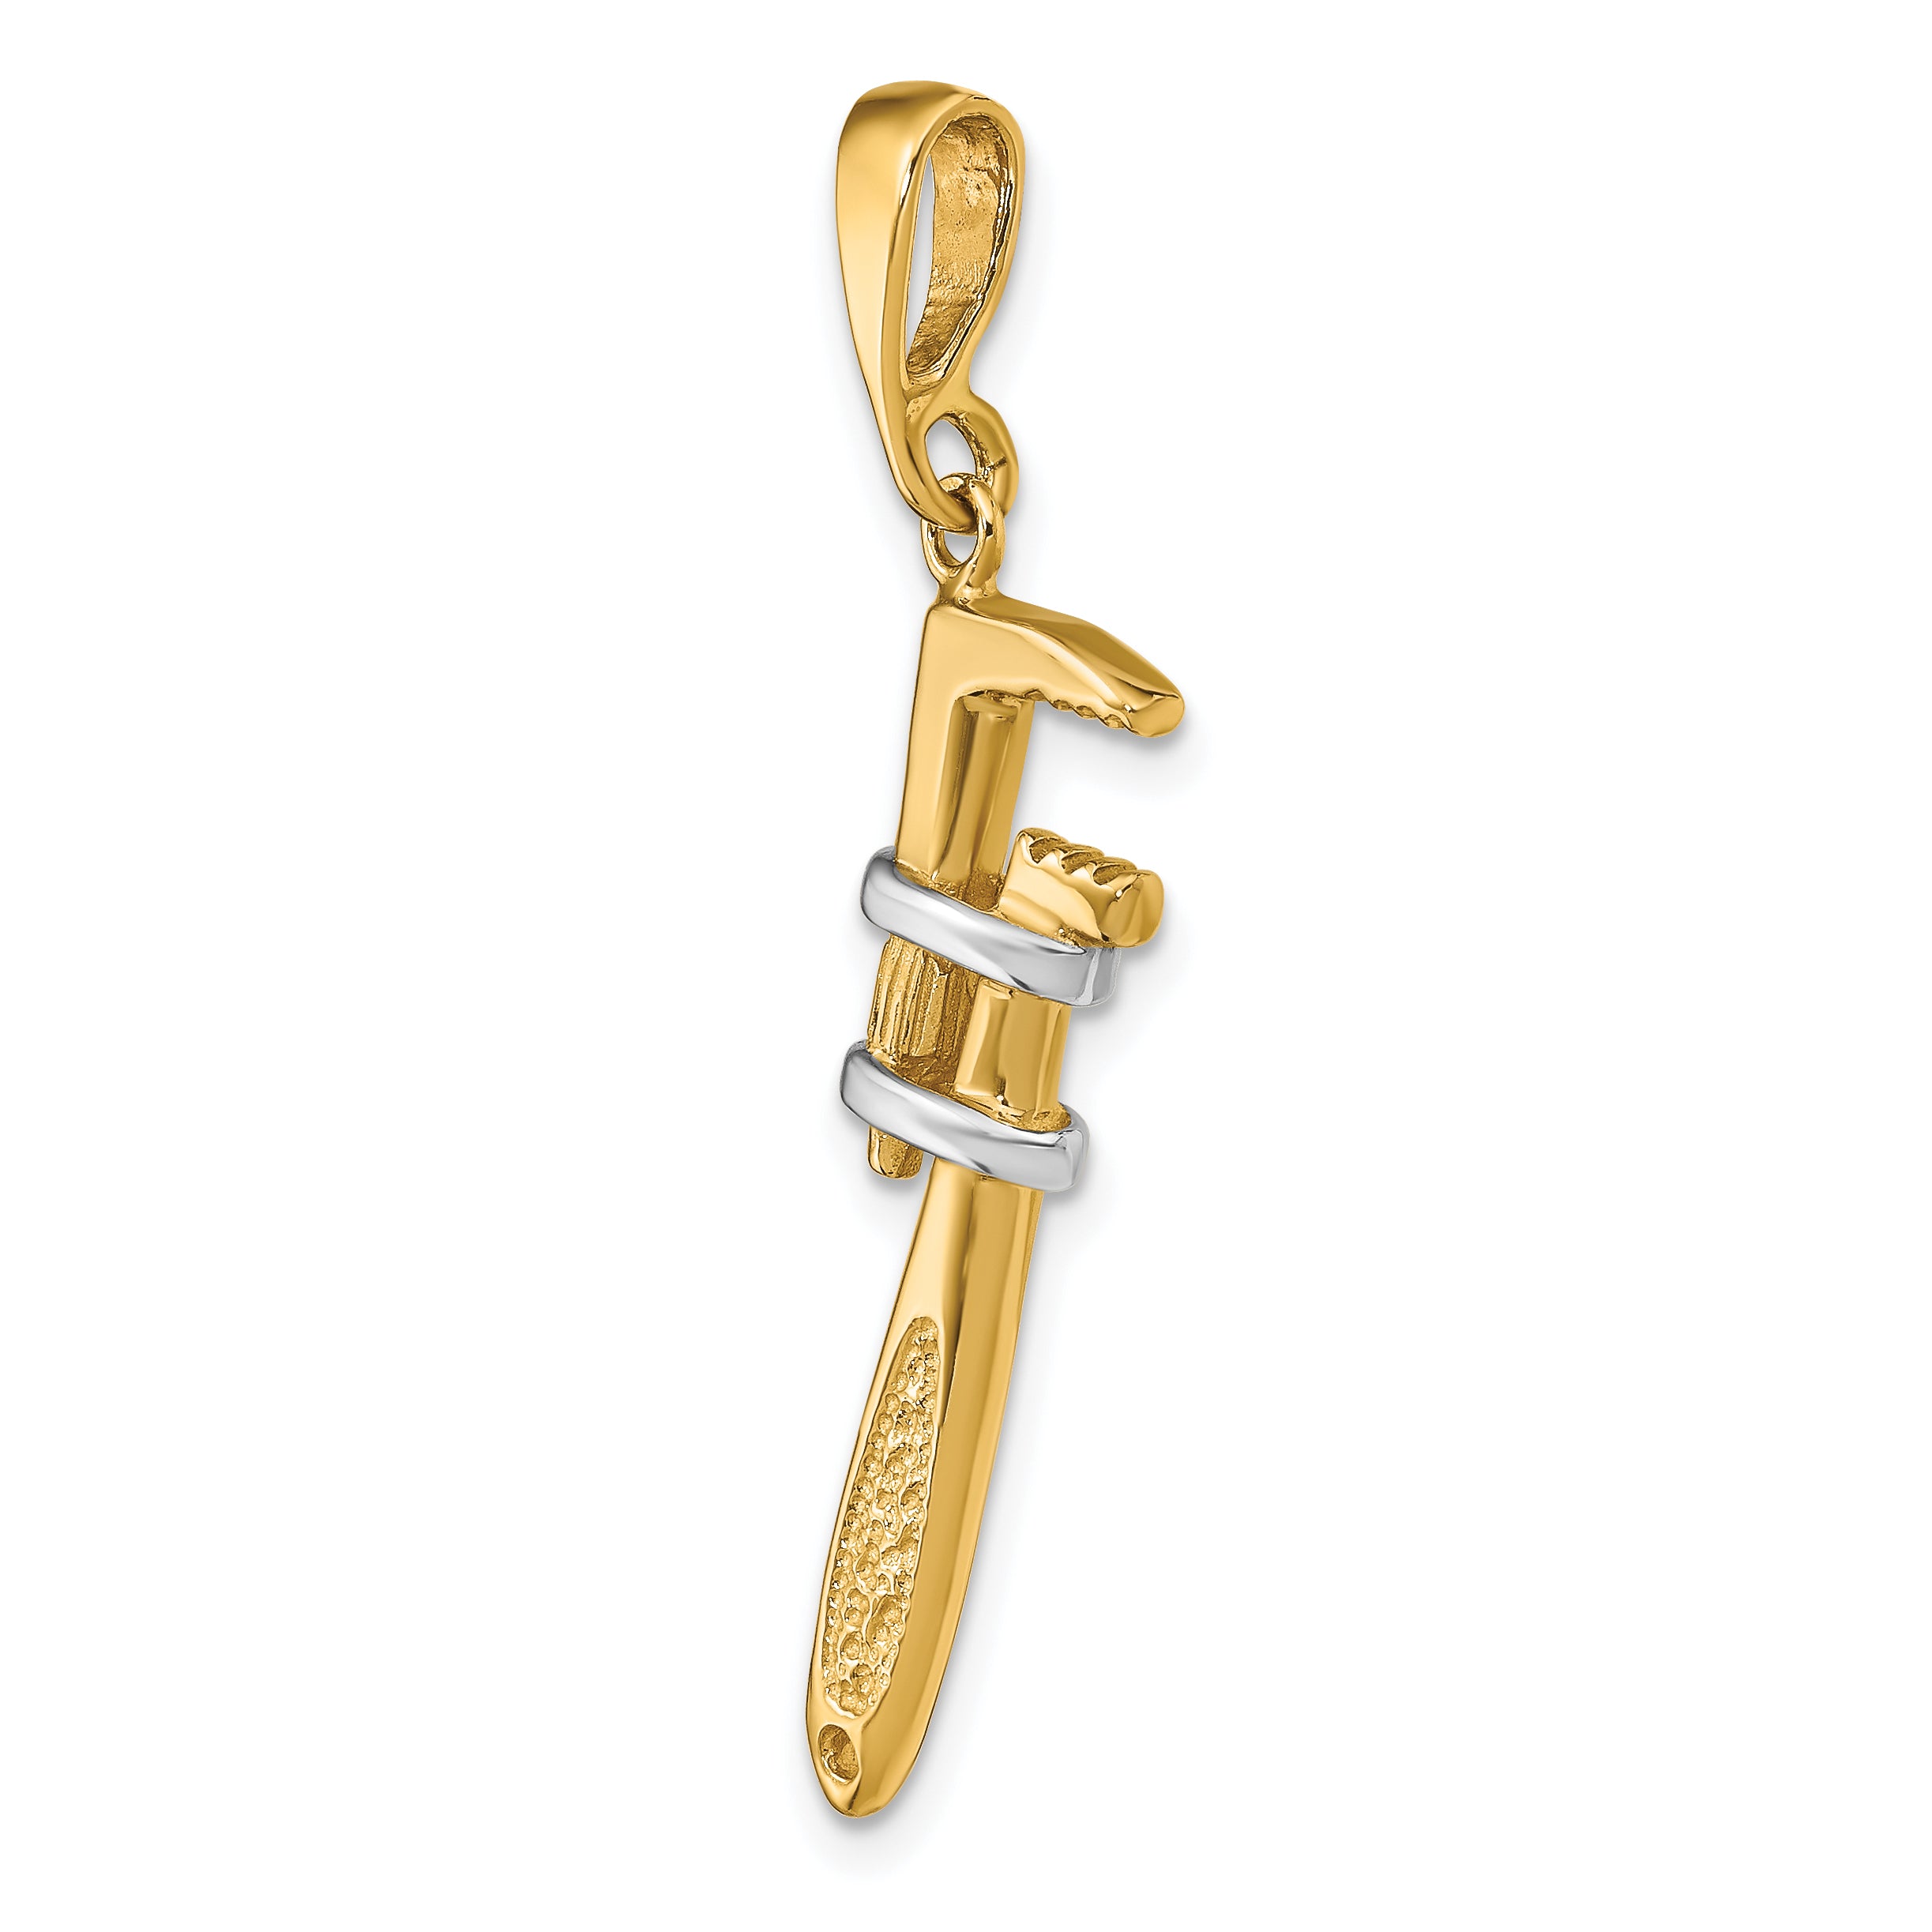 14K w/Rhodium 3-D Pipe Wrench Charm